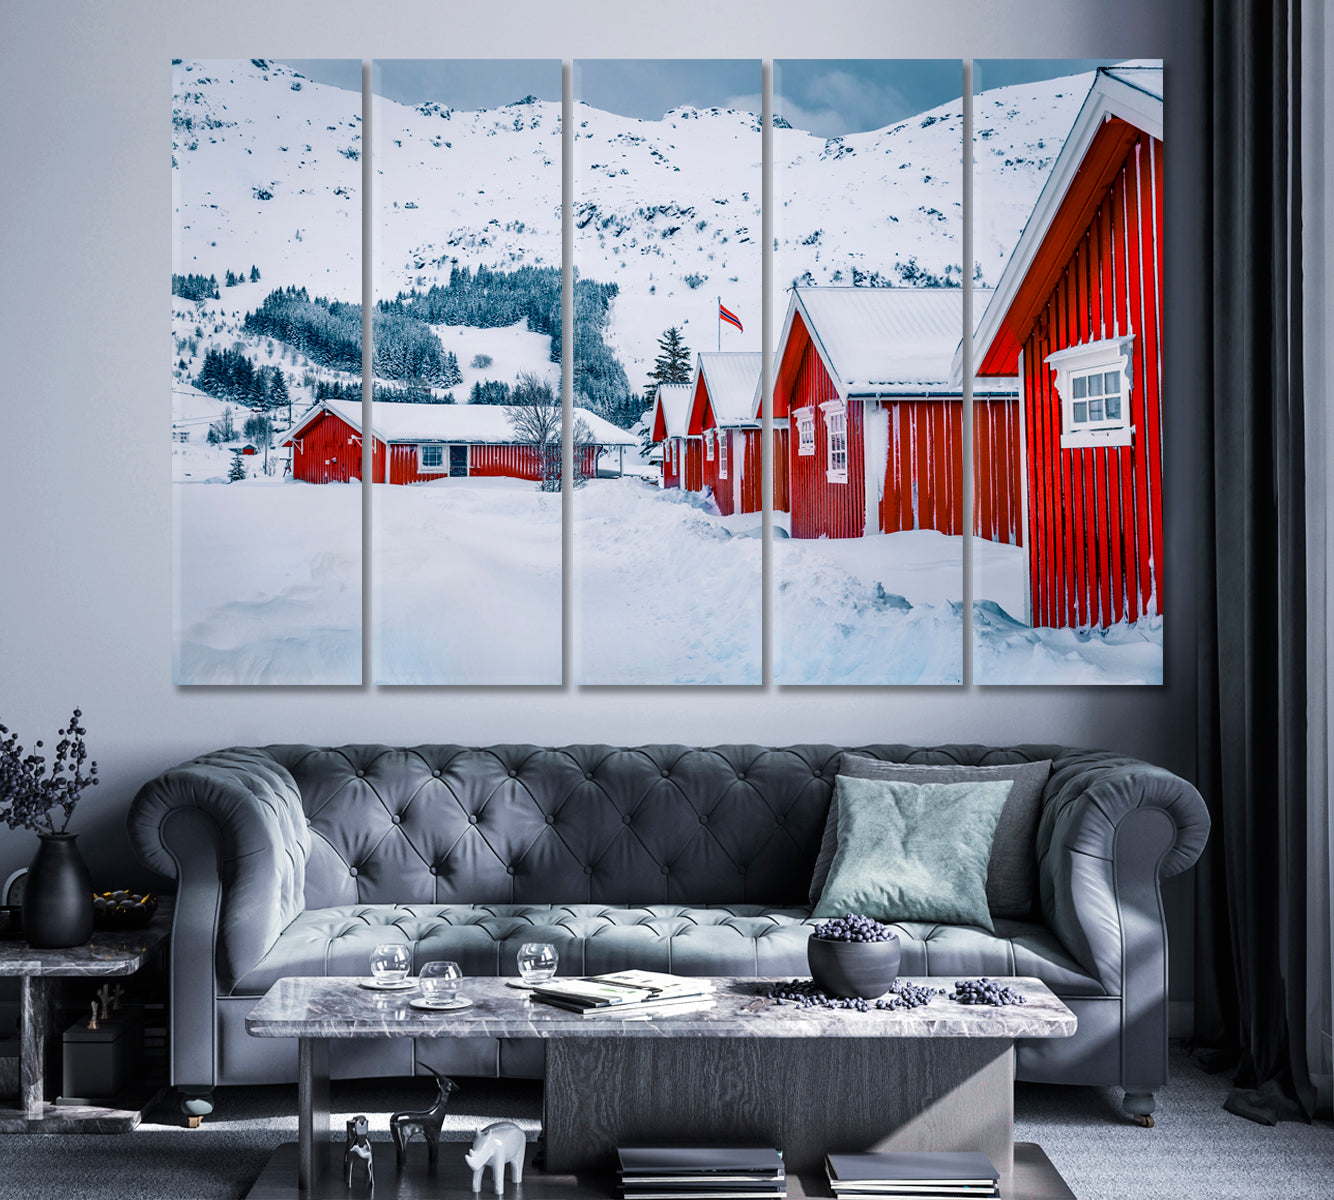 Lofoten Islands with Traditional Norwegian Red Wooden Houses Canvas Print ArtLexy 5 Panels 36"x24" inches 